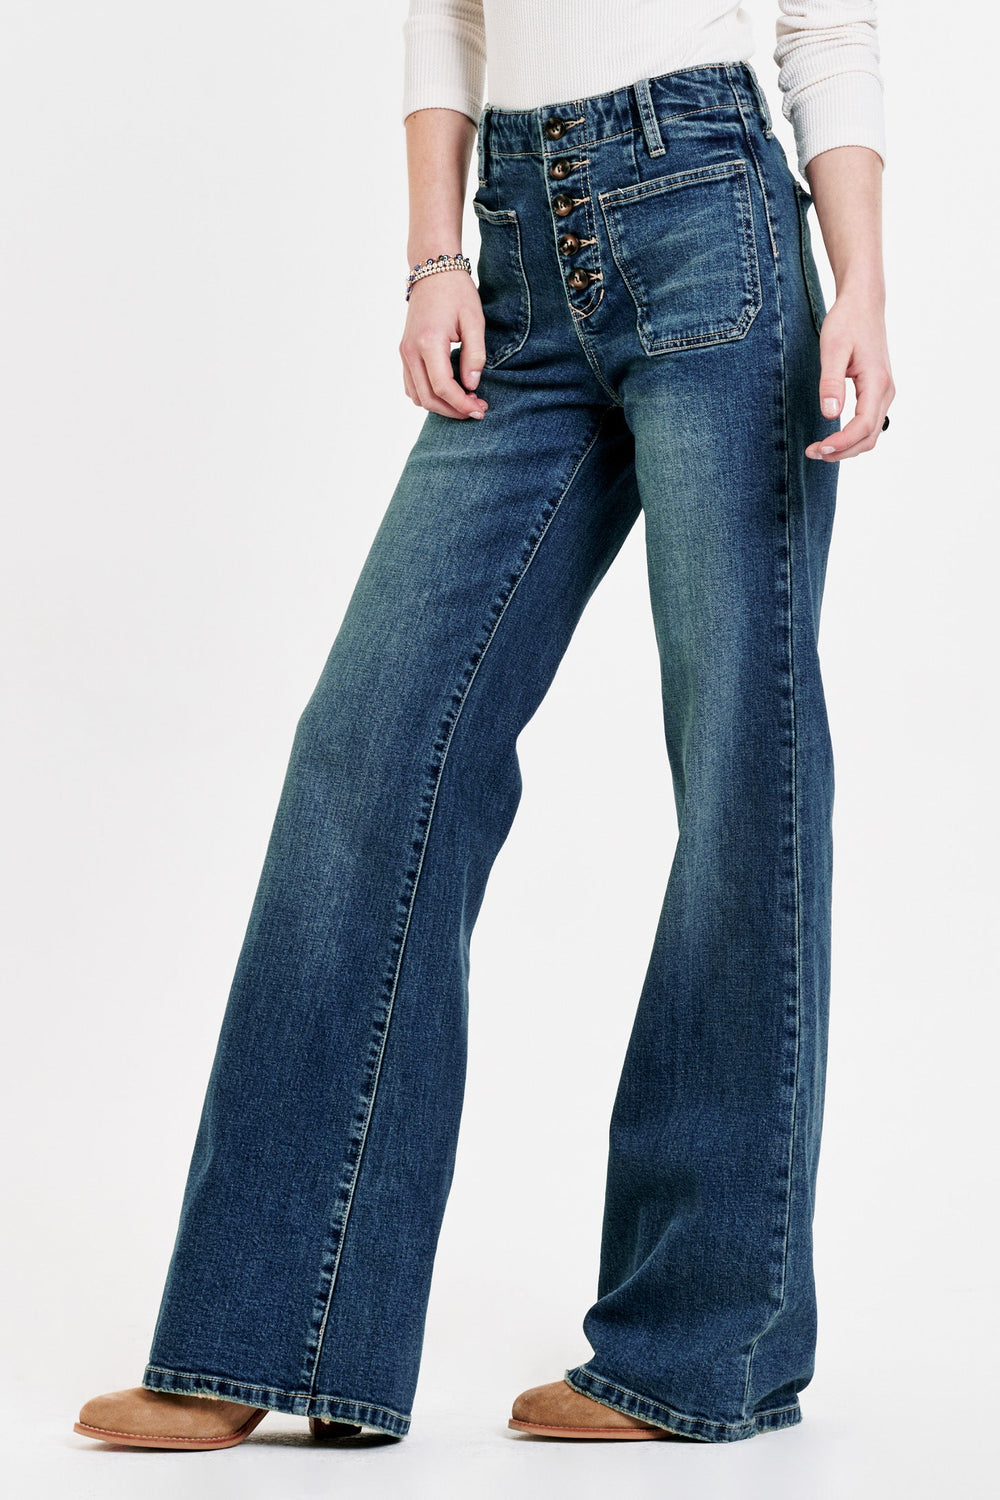 image of a female model wearing a JAMES SUPER HIGH RISE WIDE LEG JEANS CATALINA JEANS